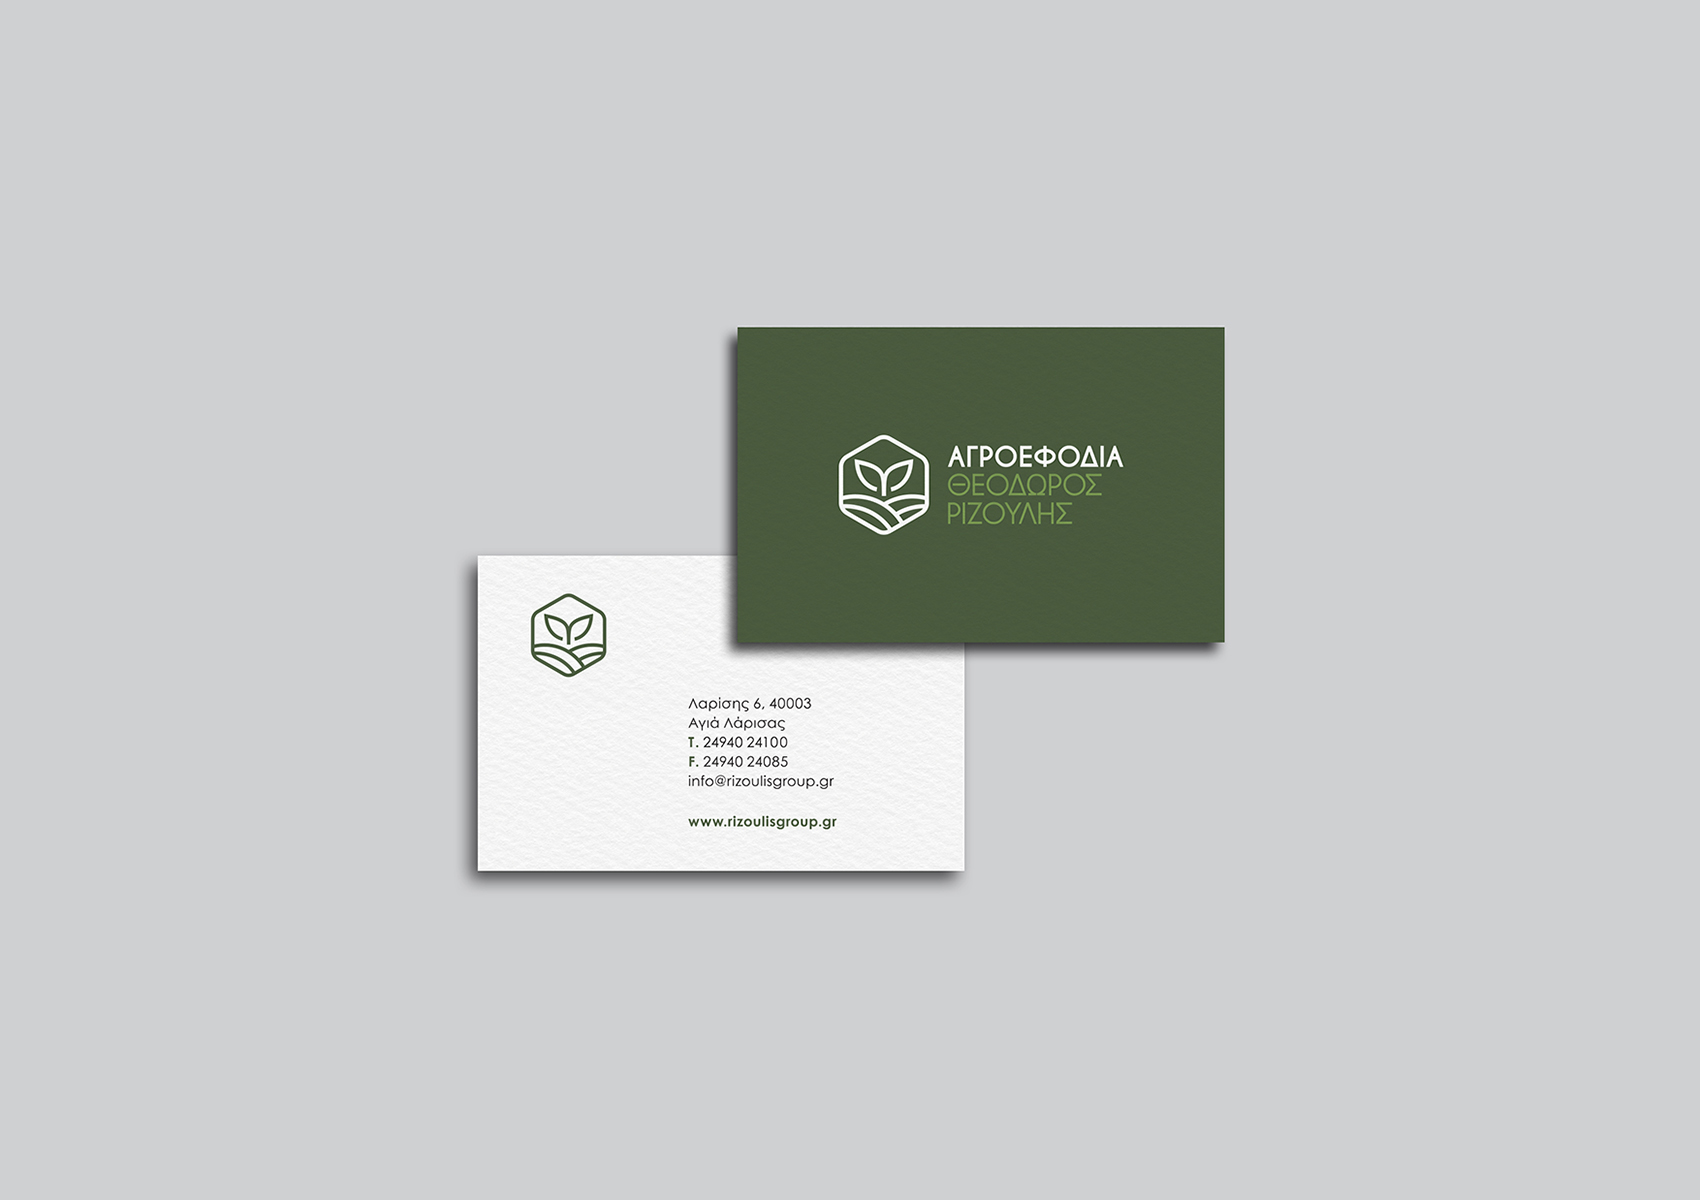 Agroefodia Rizoulis Business cards 1700x1200 by xhristakis